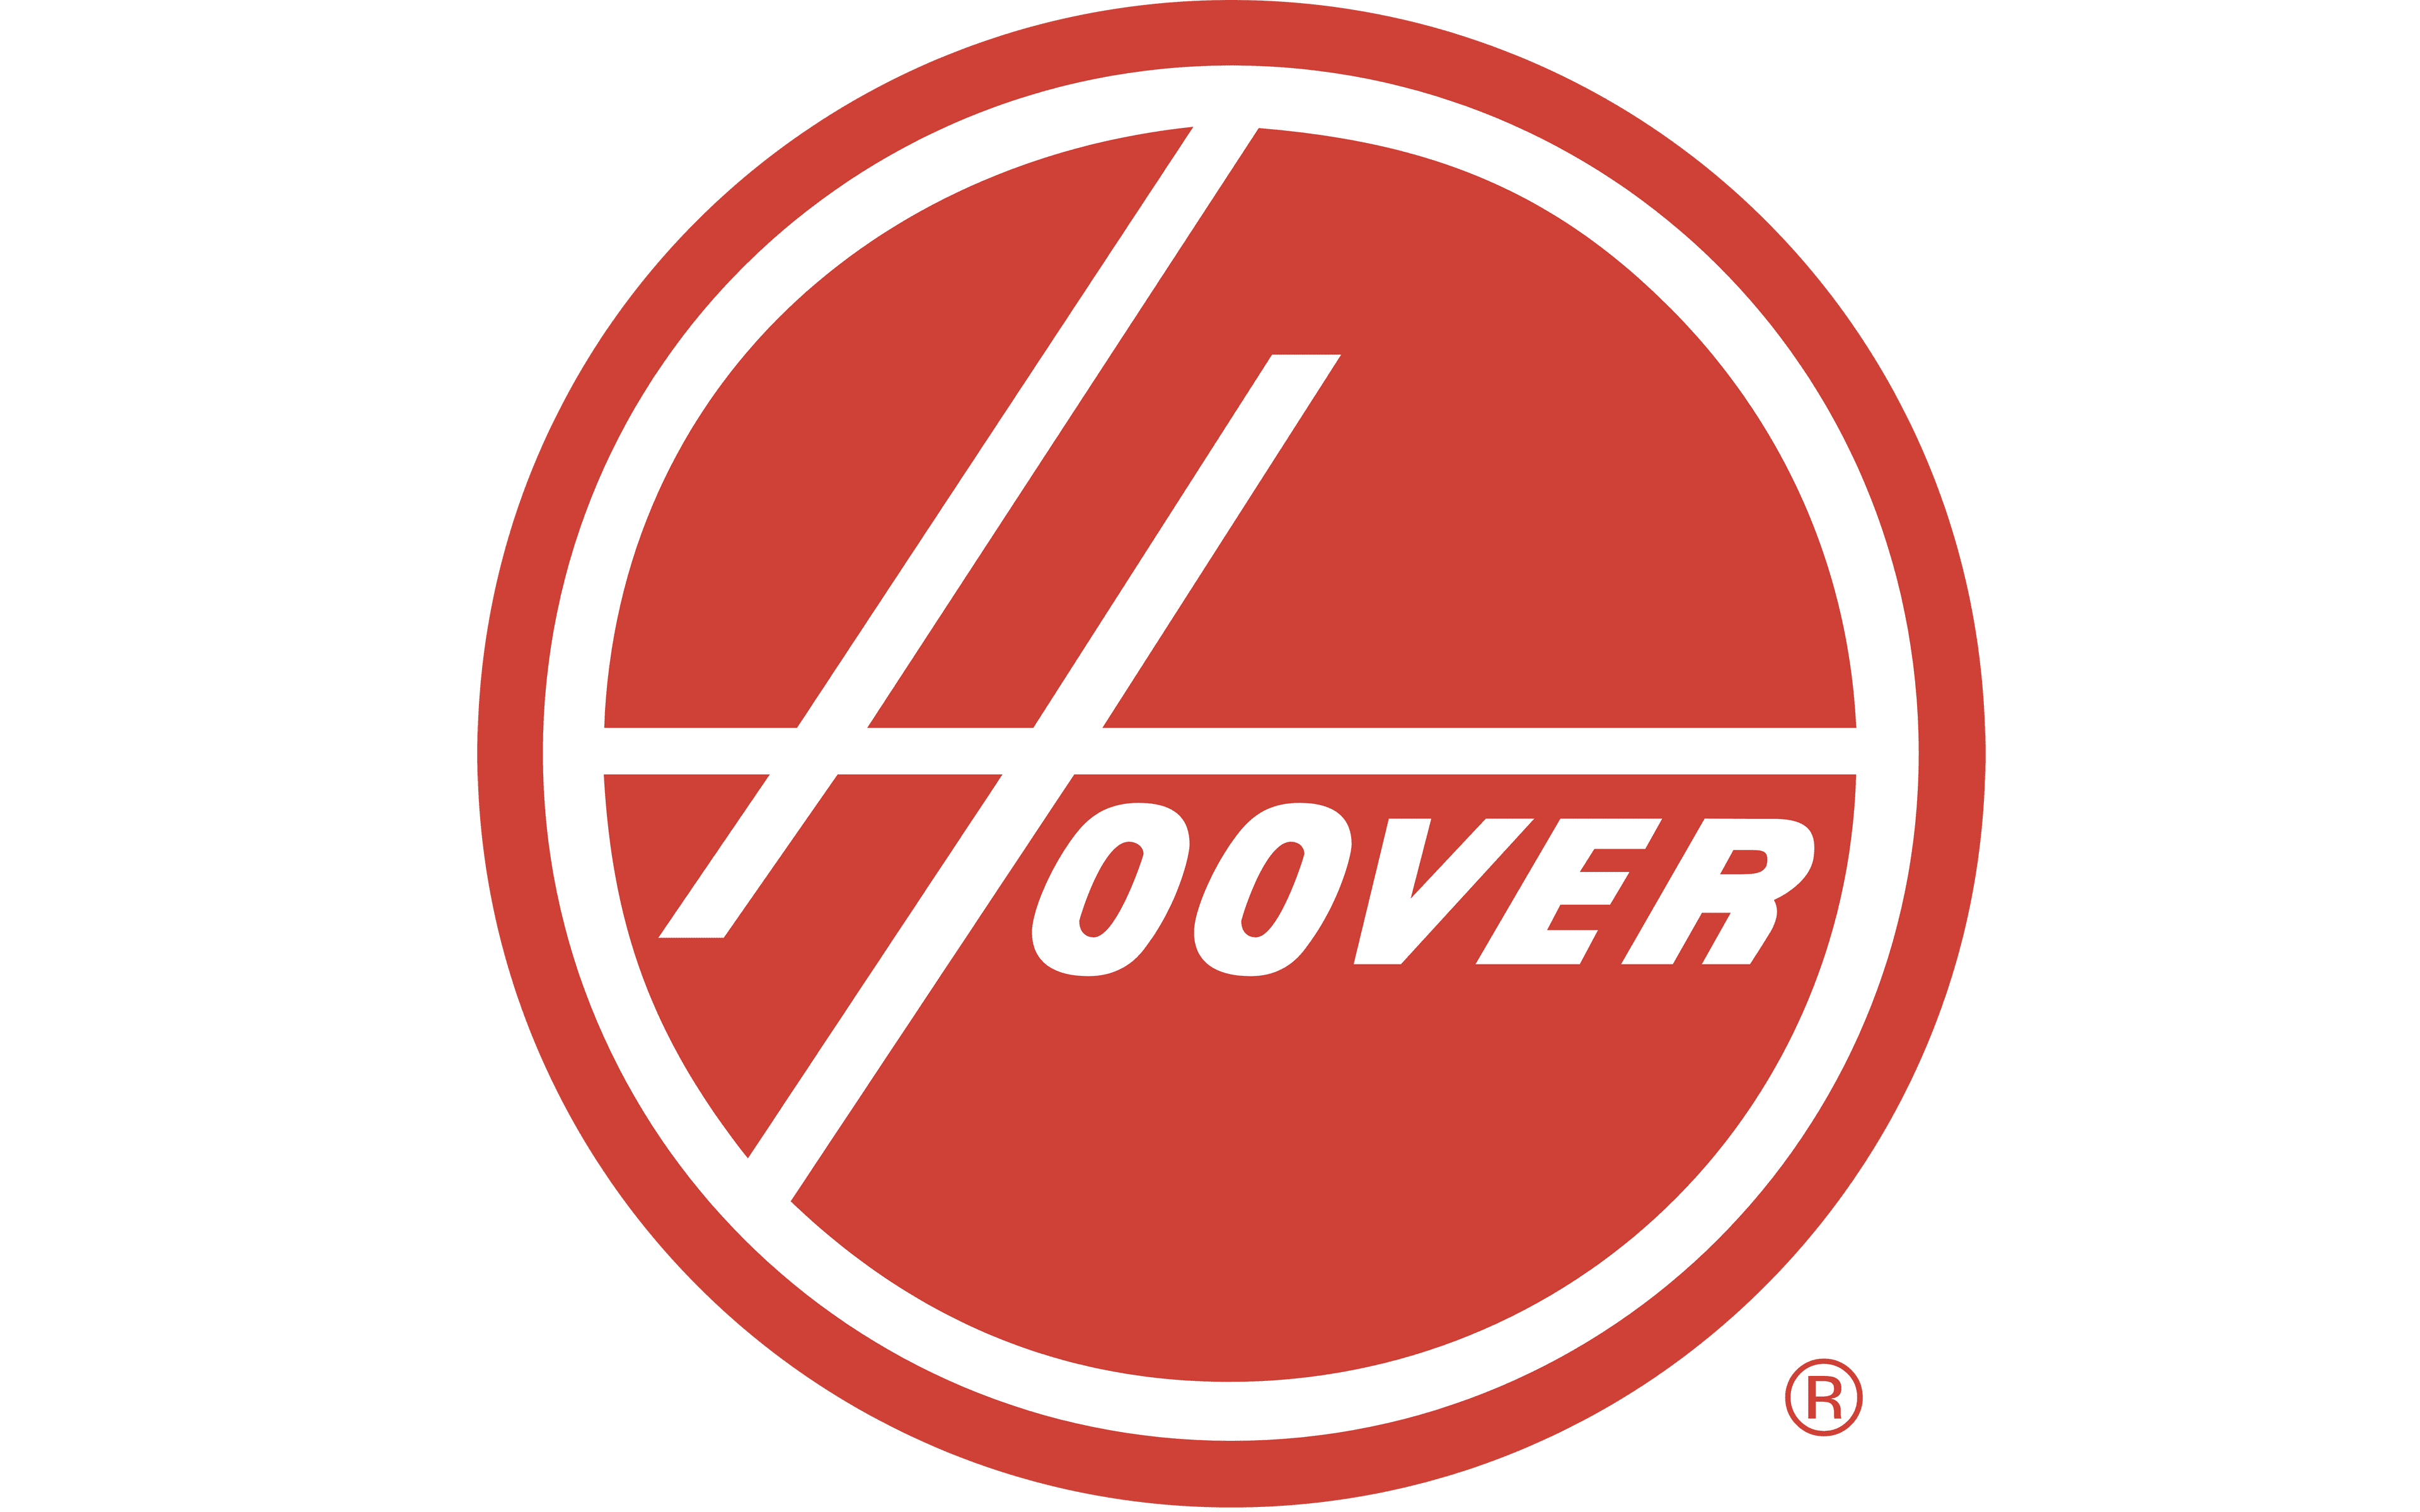 Norman Davies Electrical - Hoover